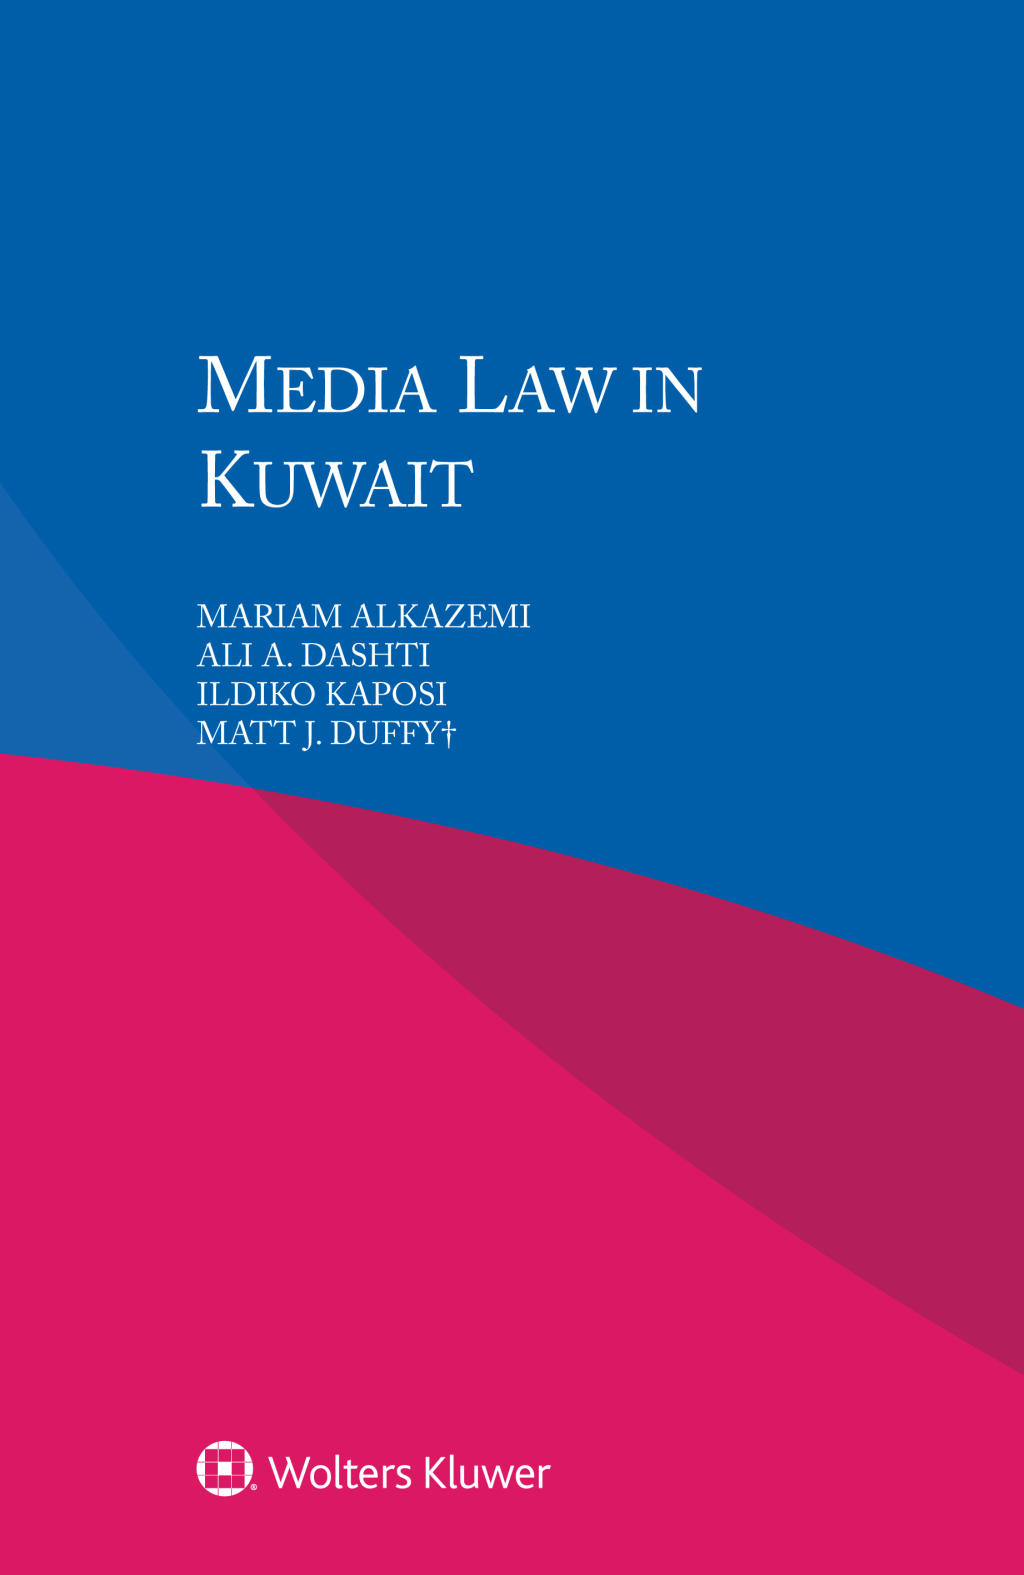 ISBN 9789403503110 product image for Media Law in Kuwait (eBook Rental) | upcitemdb.com